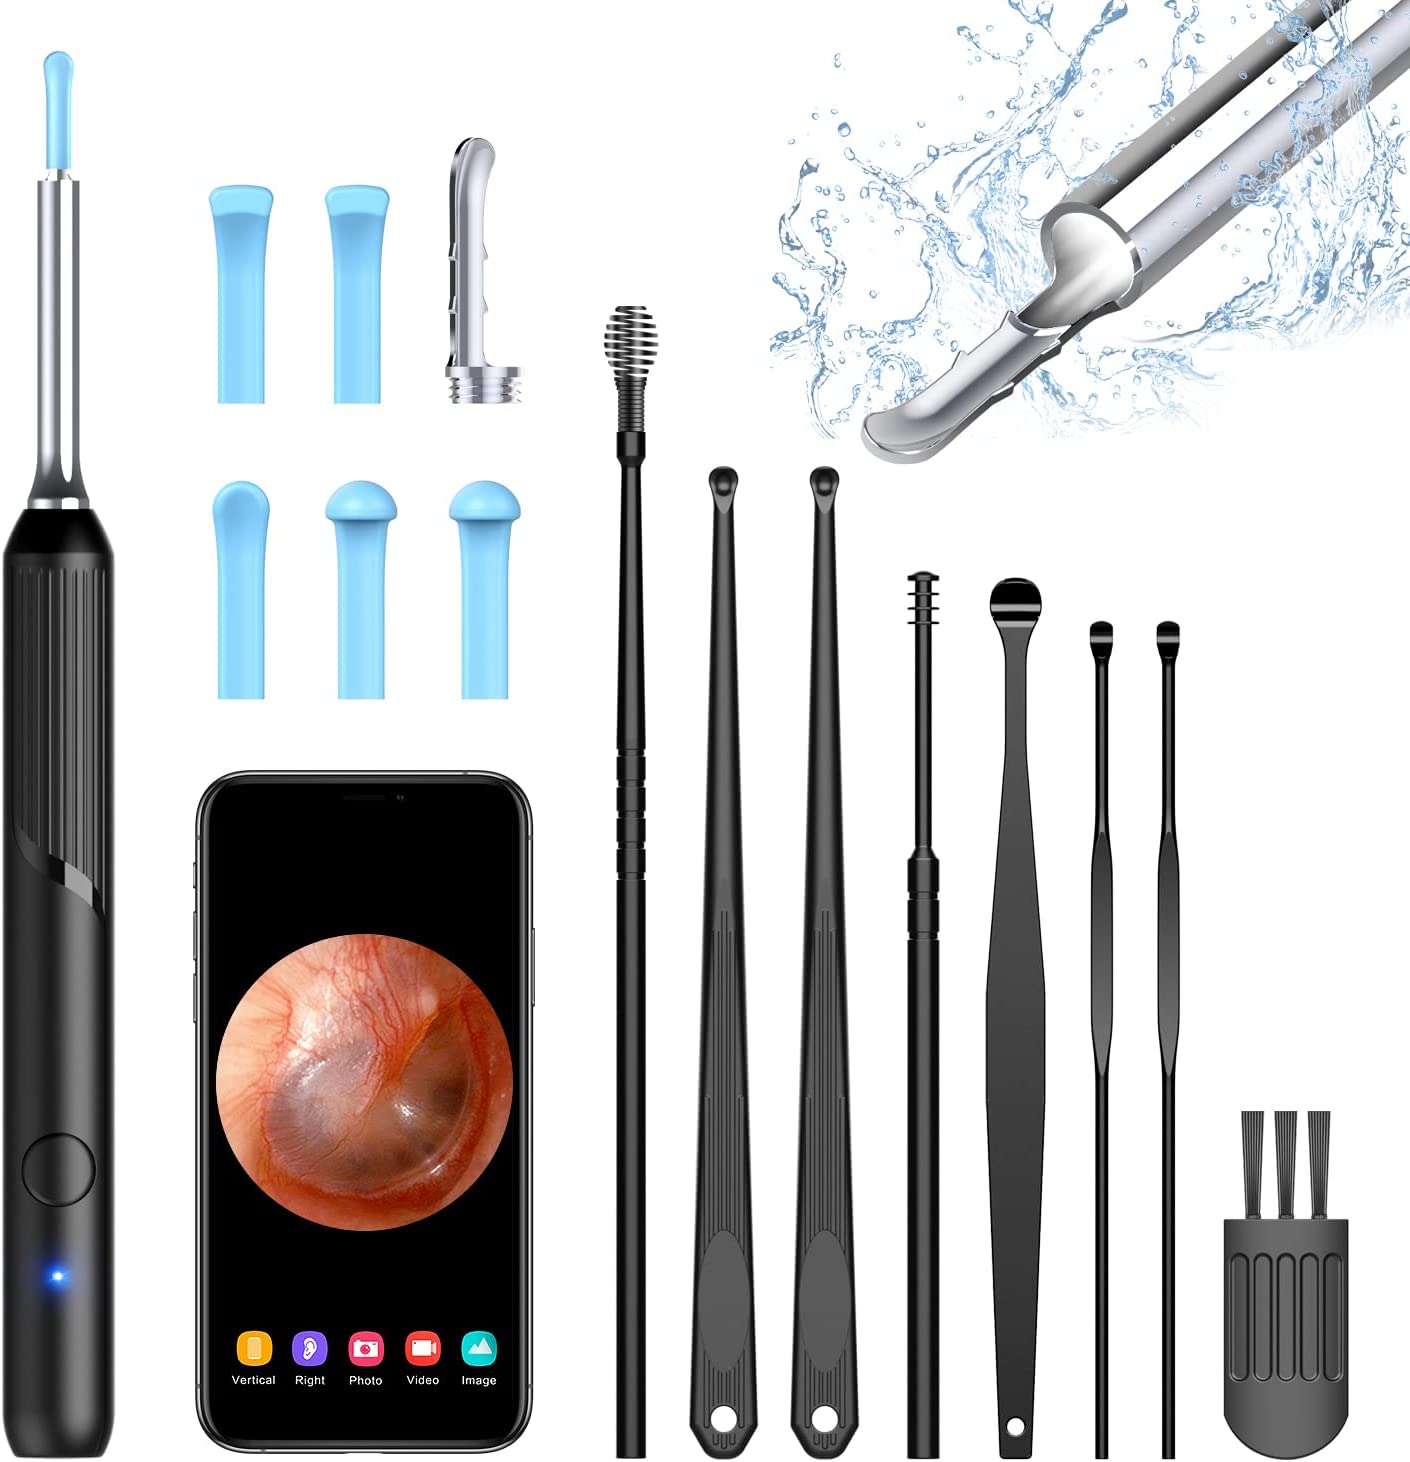 Ear Wax Removal Tool, Ear Cleaner with 1080P Camera, Ear Cleaning Kit with 8 Pcs Ear Set, Earwax Remover with Light, Endoscope with 5 Auxiliary Accessories, Otoscope for iPhone, iPad, Android Phones